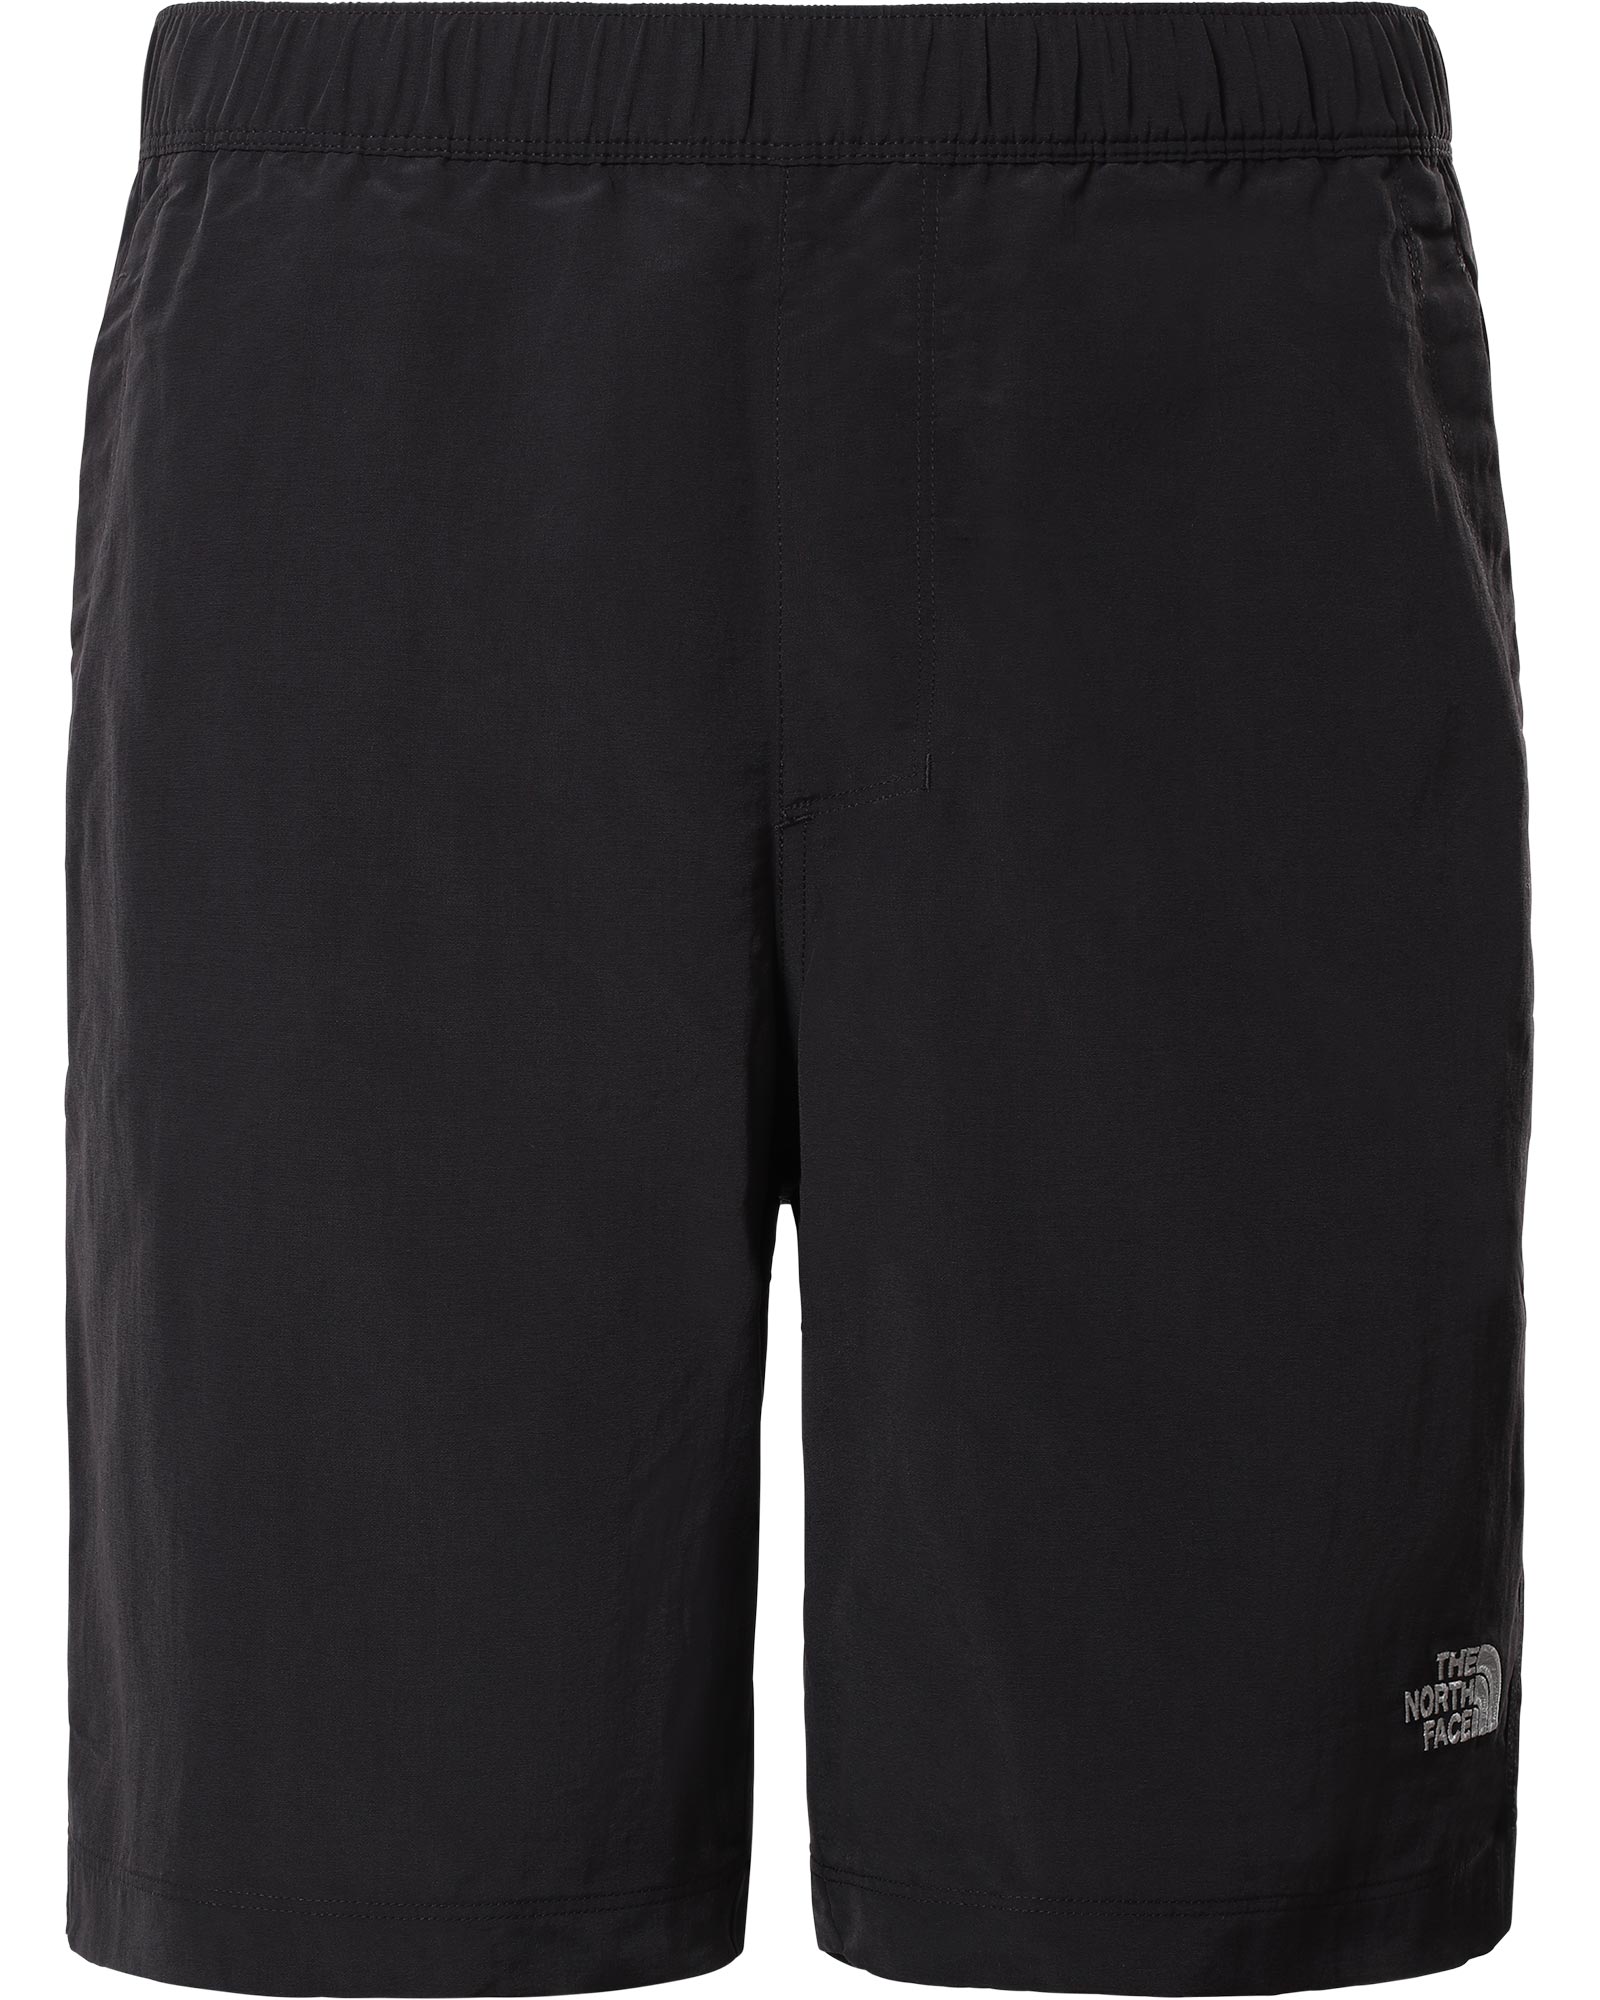 The North Face Class V Water Men’s Shorts - TNF Black XS